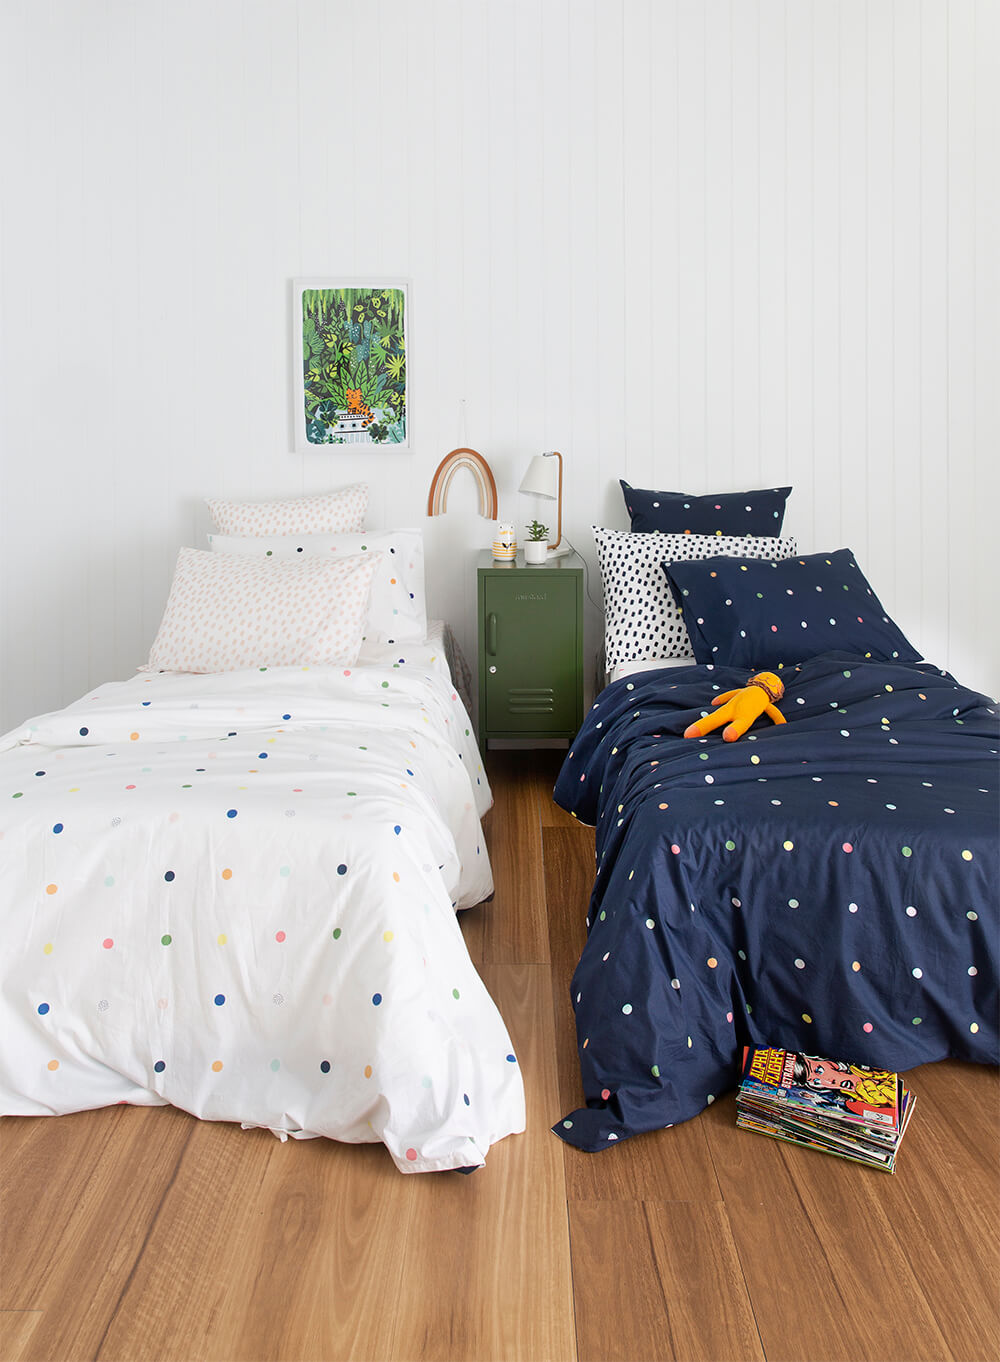 Spot And Dot Night Sky Pillowcase 10 Off First Order The Home